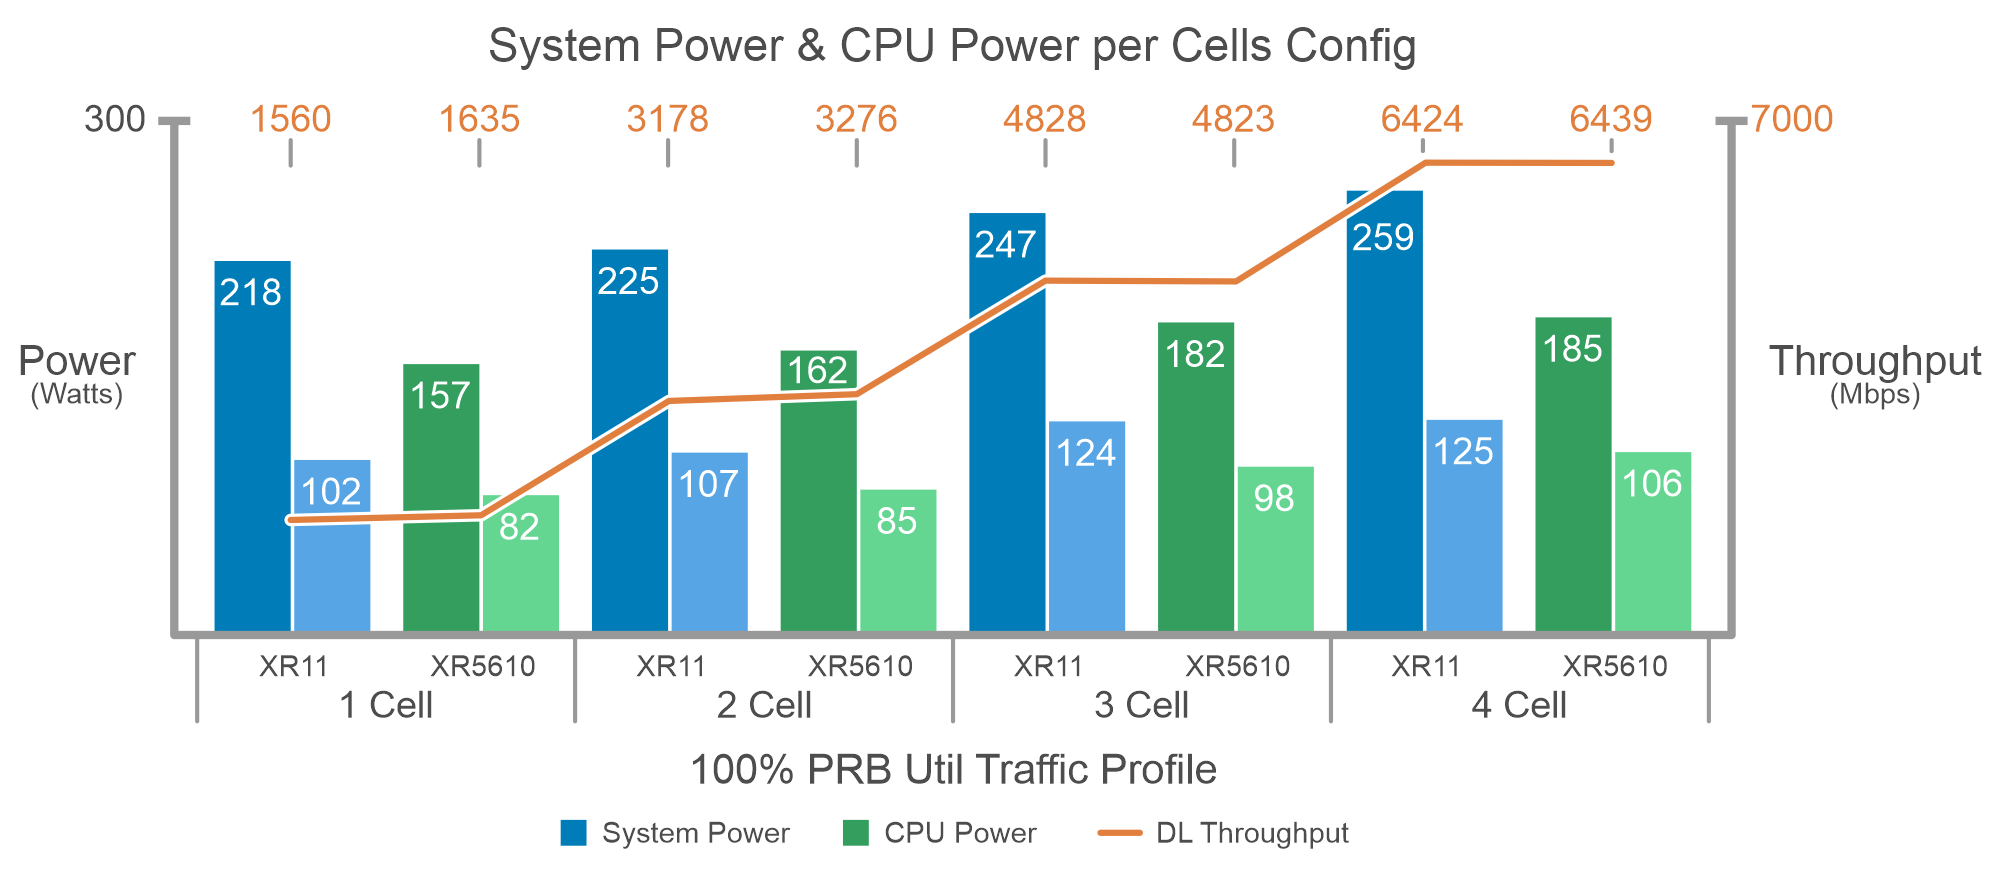 Figure 7 compares system power consumption for 15G and 16G servers